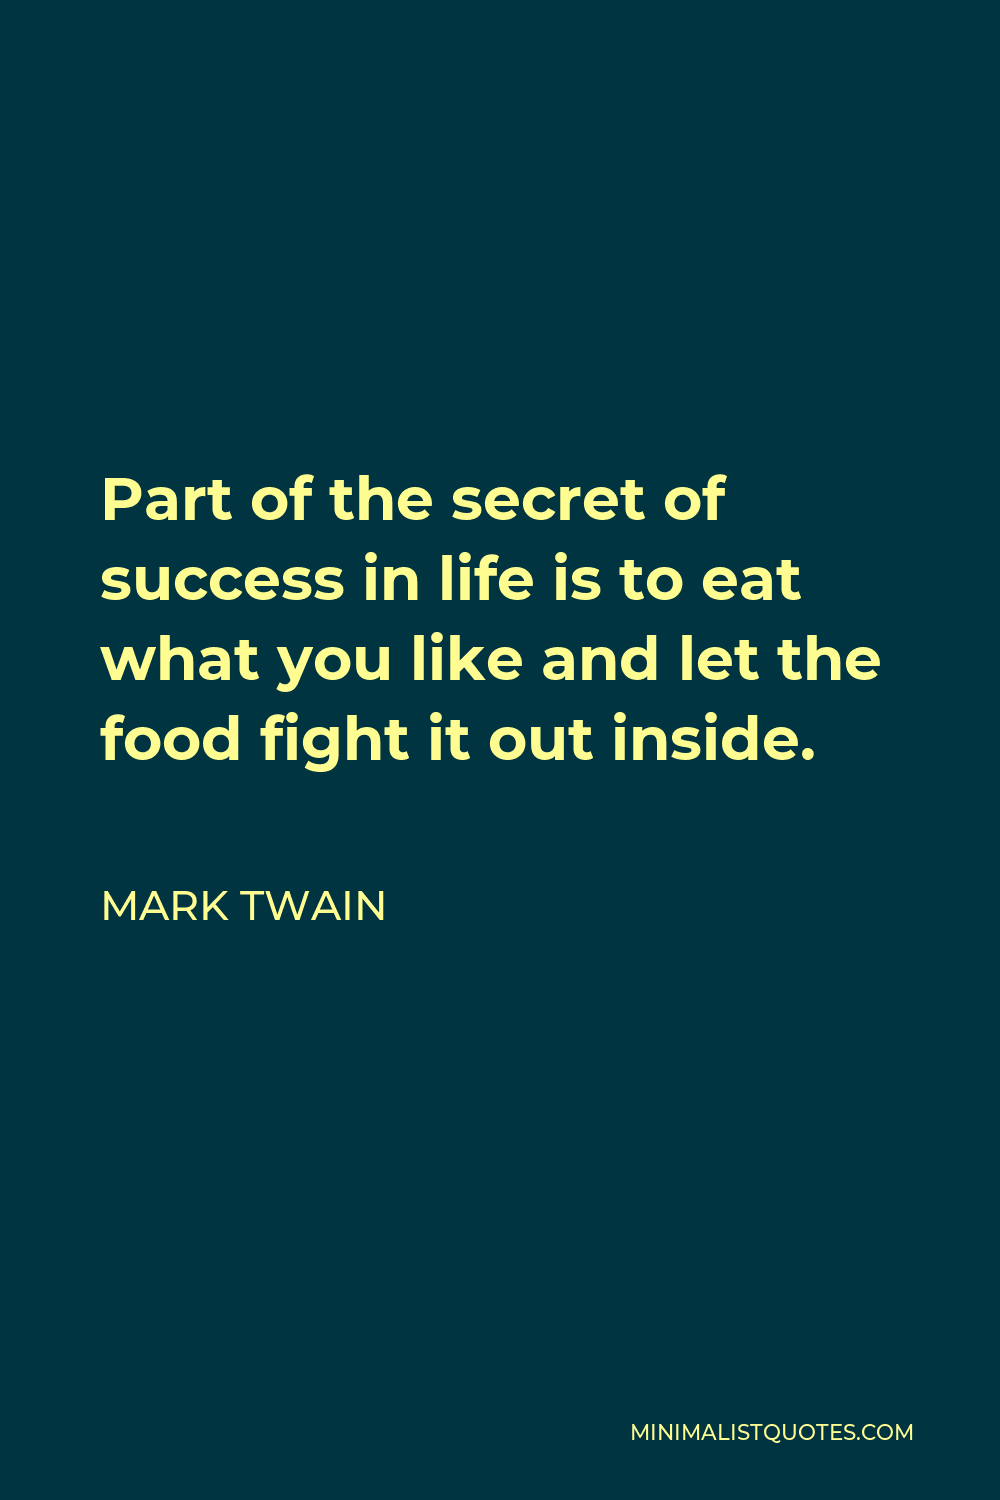 Mark Twain Quote - Part of the secret of success in life is to eat what you like and let the food fight it out inside.